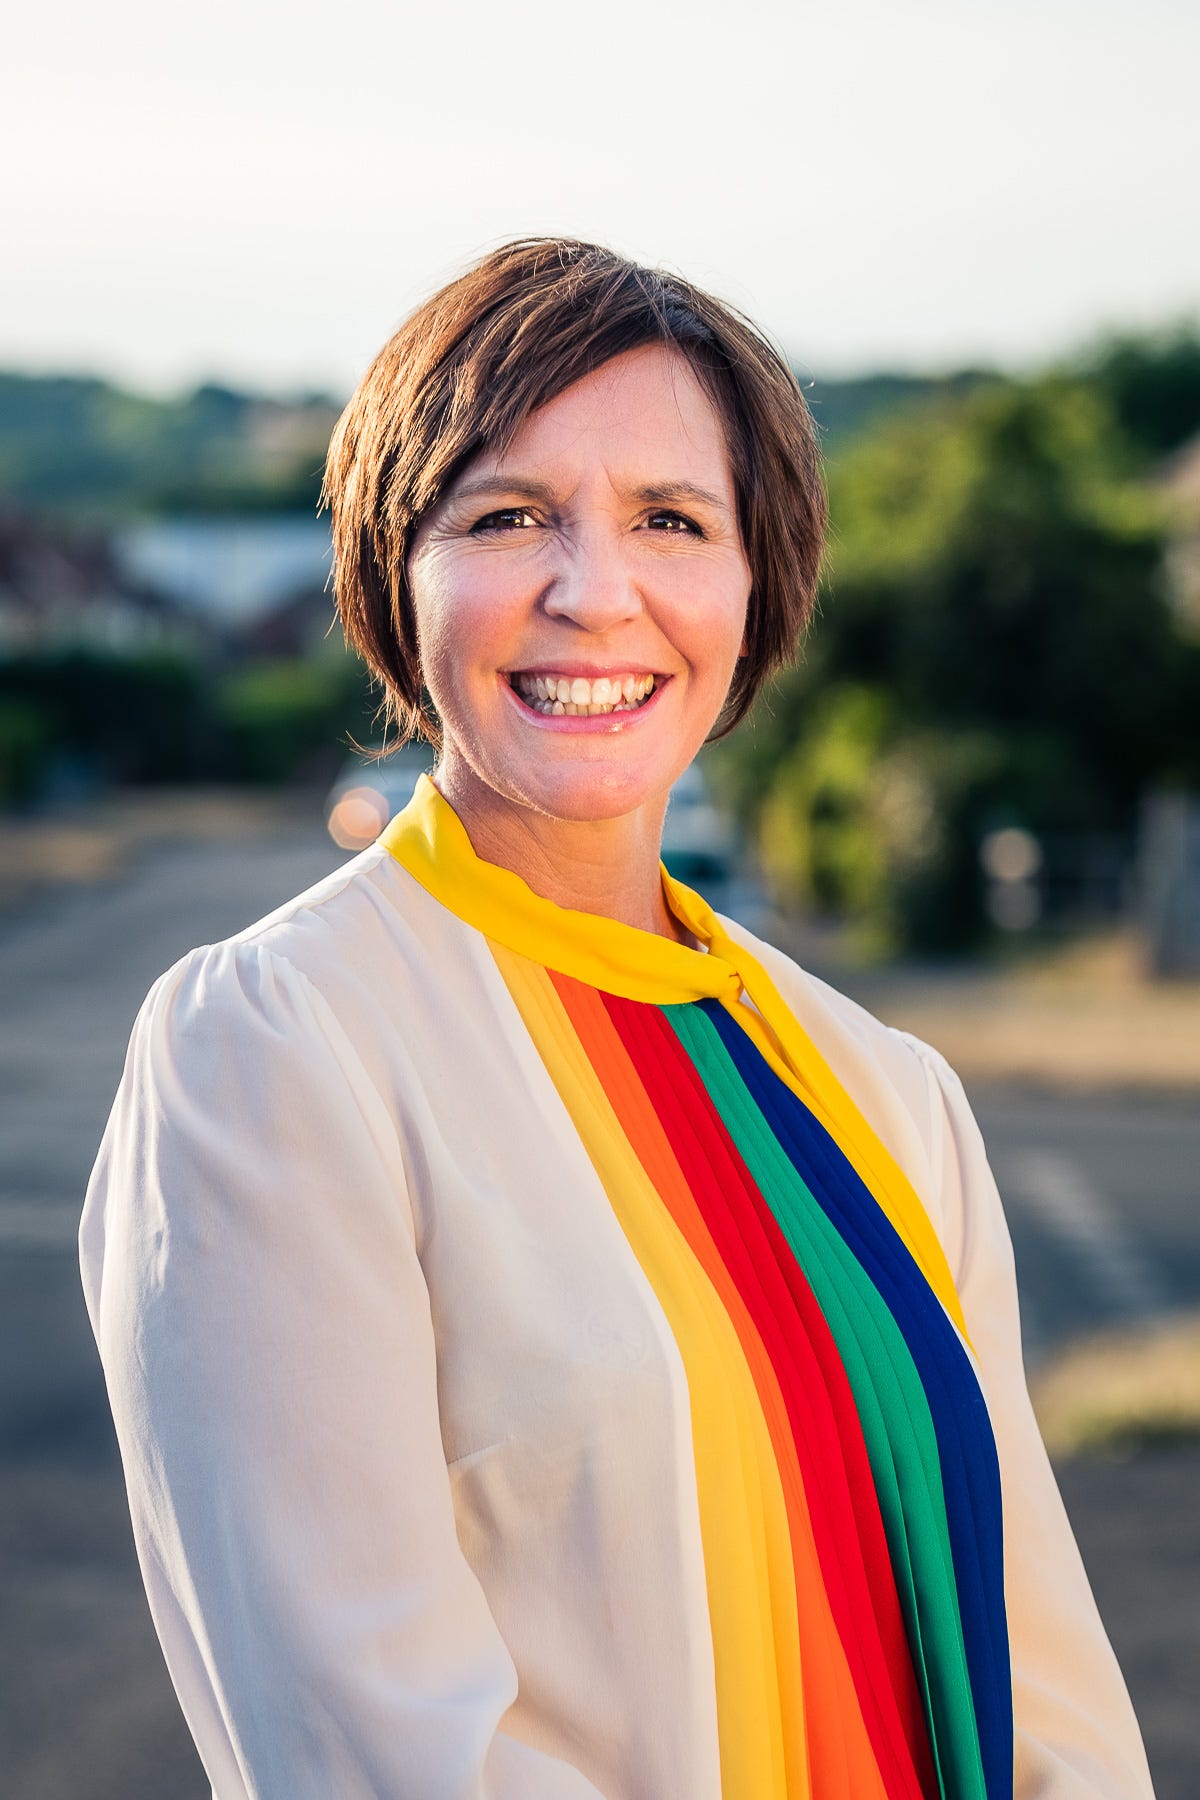 Portrait of a smiling woman wearing a white blouse with rainbow pattern outside during golden hour